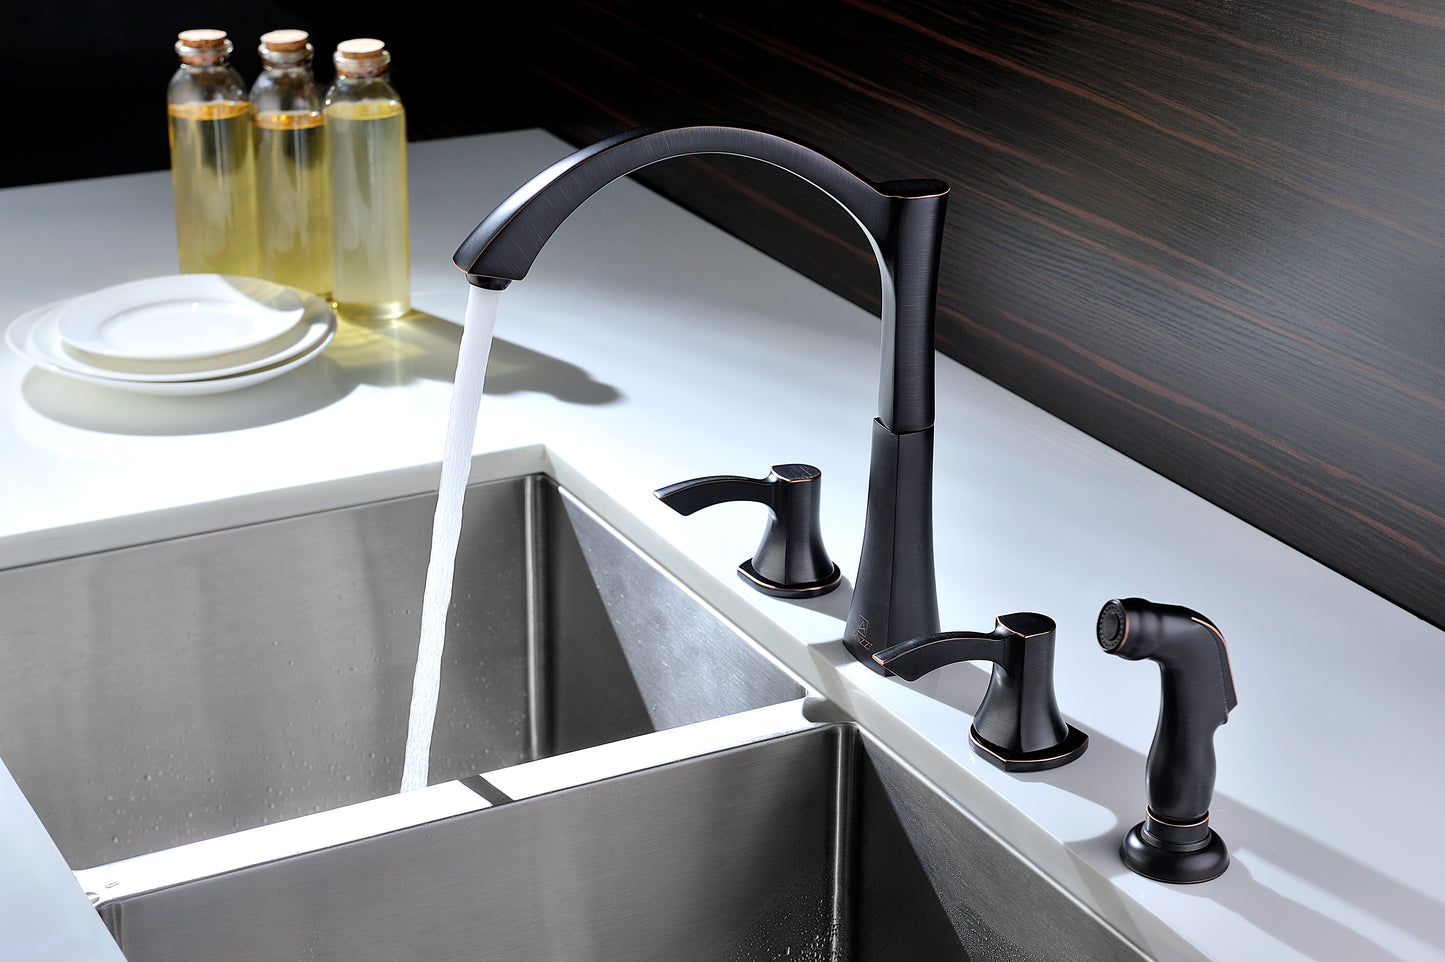 Soave Series 2-Handle Standard Kitchen Faucet